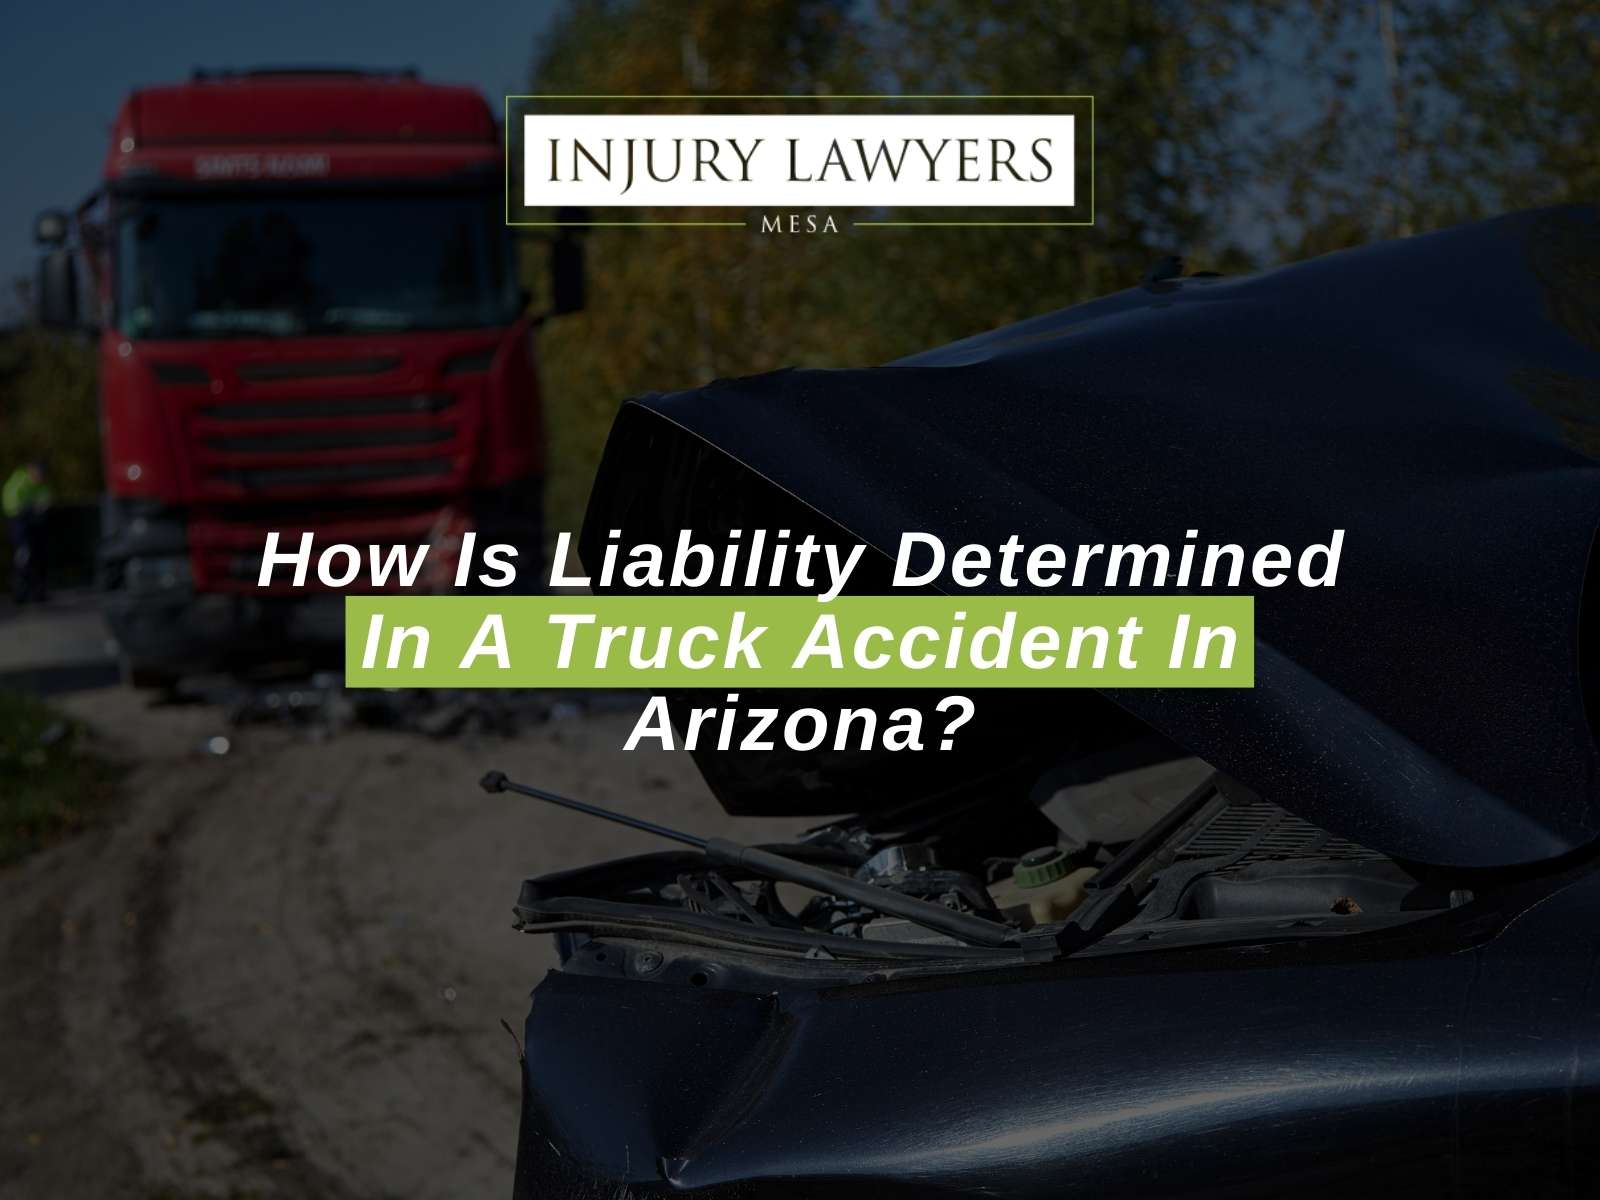 How Is Liability Determined In A Truck Accident In Arizona